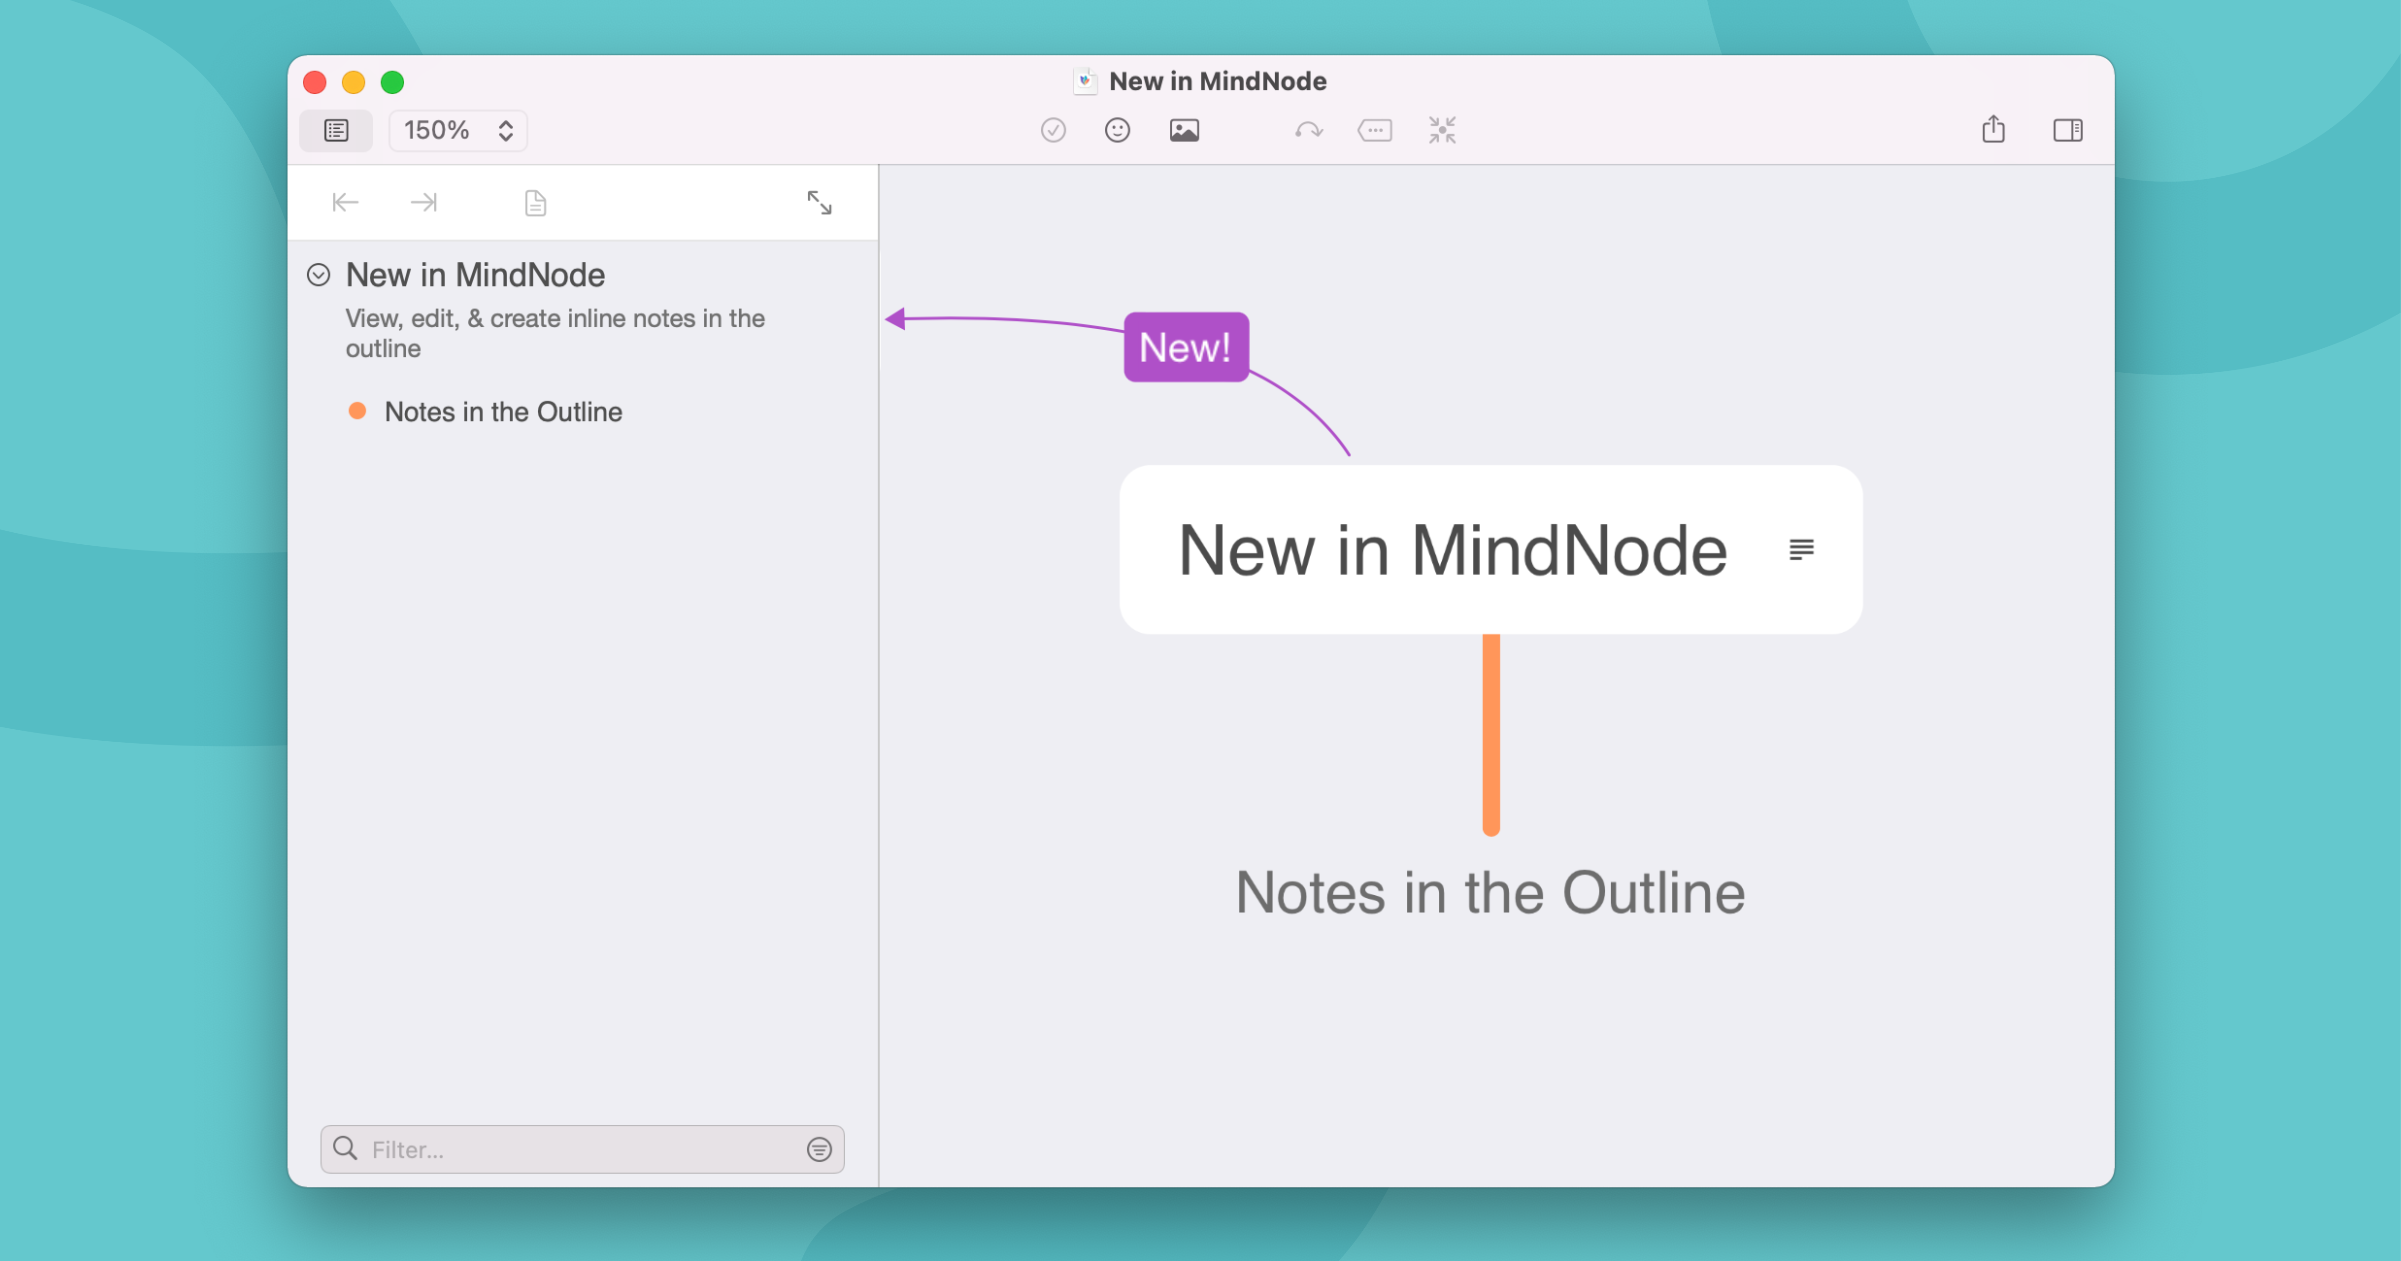 View, edit & create inline notes in the outline